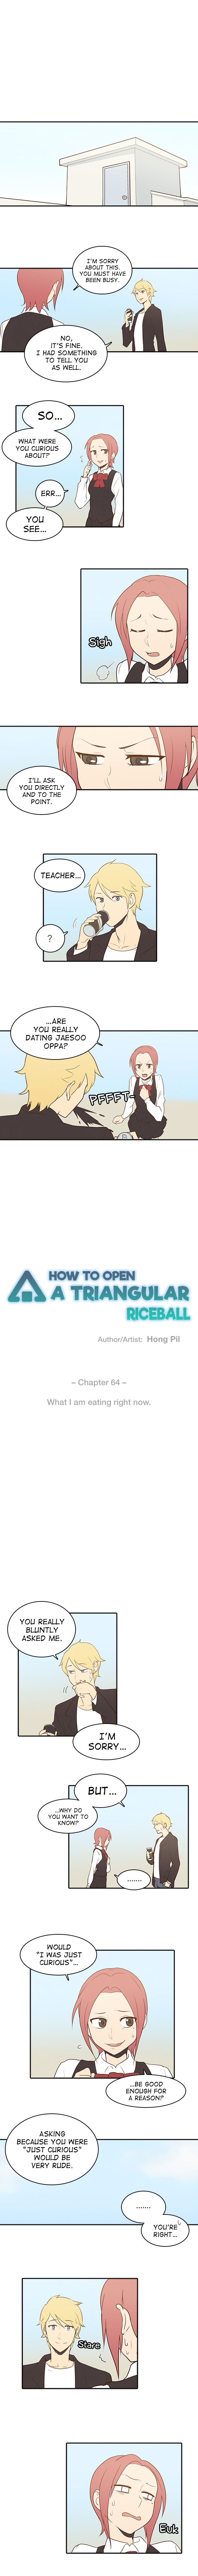 How to Open a Triangular Riceball - Chapter 64 Page 3